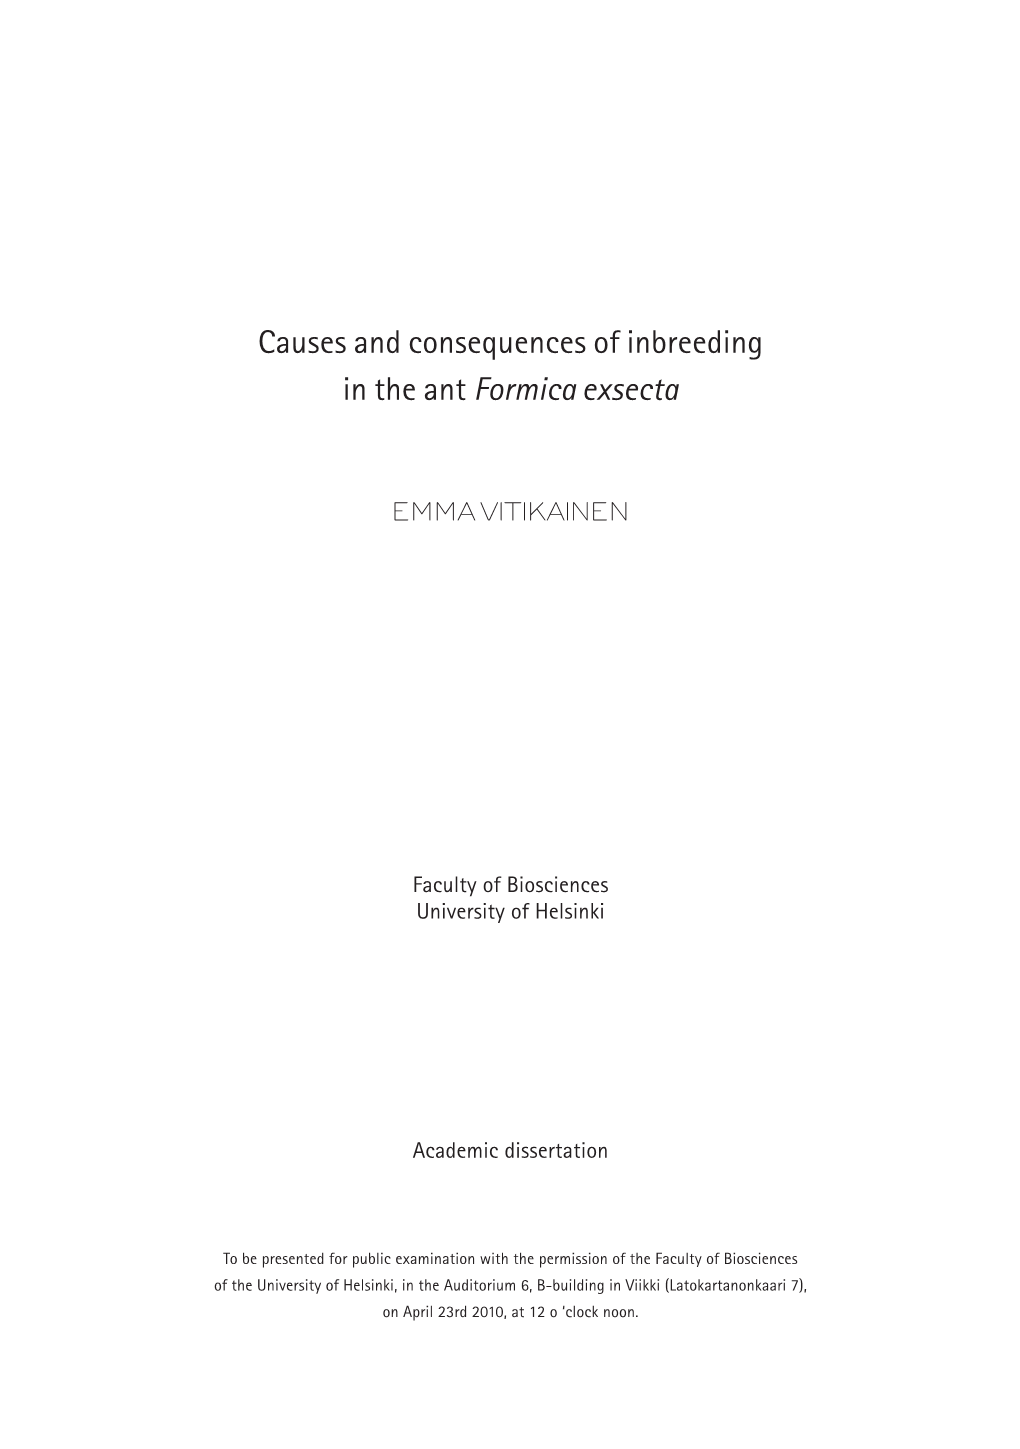 Causes and Consequences of Inbreeding in the Ant Formica Exsecta